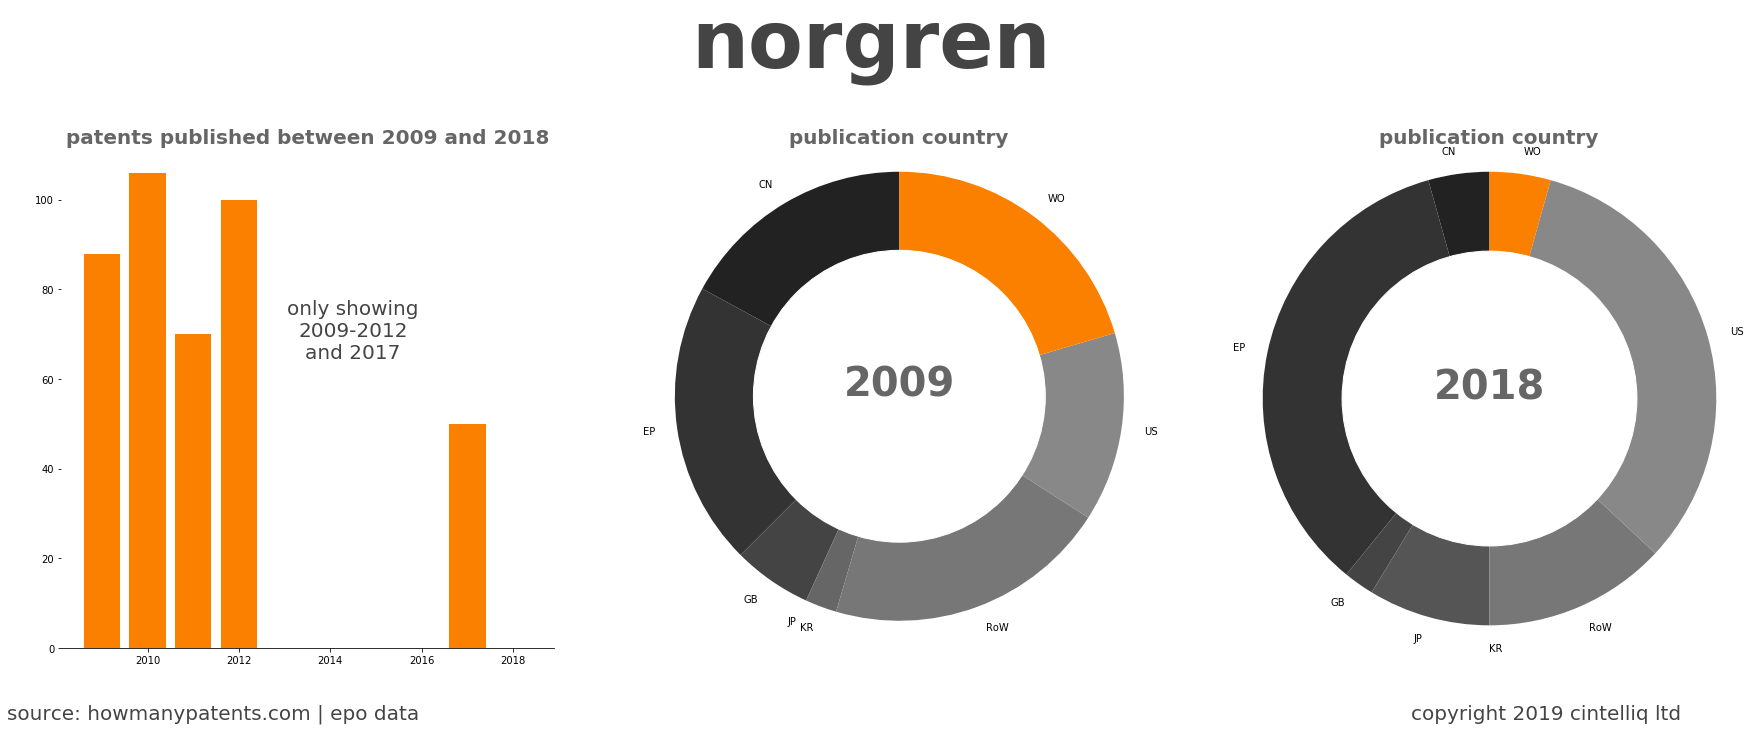 summary of patents for Norgren